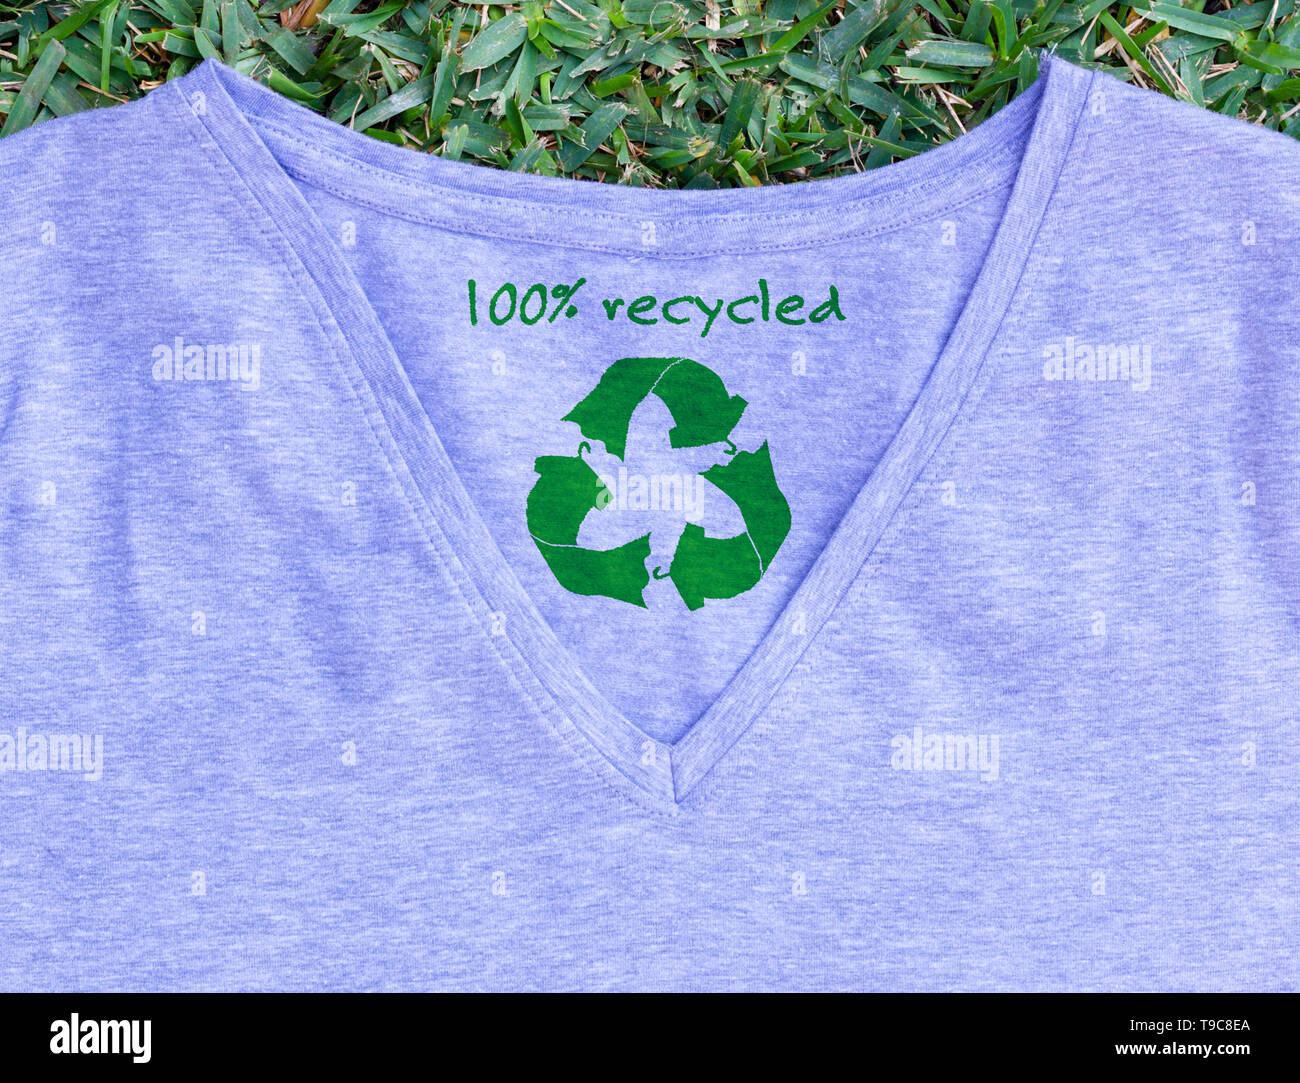 Recycle clothes icon on t shirt with 100% Recycled text, concept illustration reuse, recycle clothes and textiles to reduce waste Stock Photo